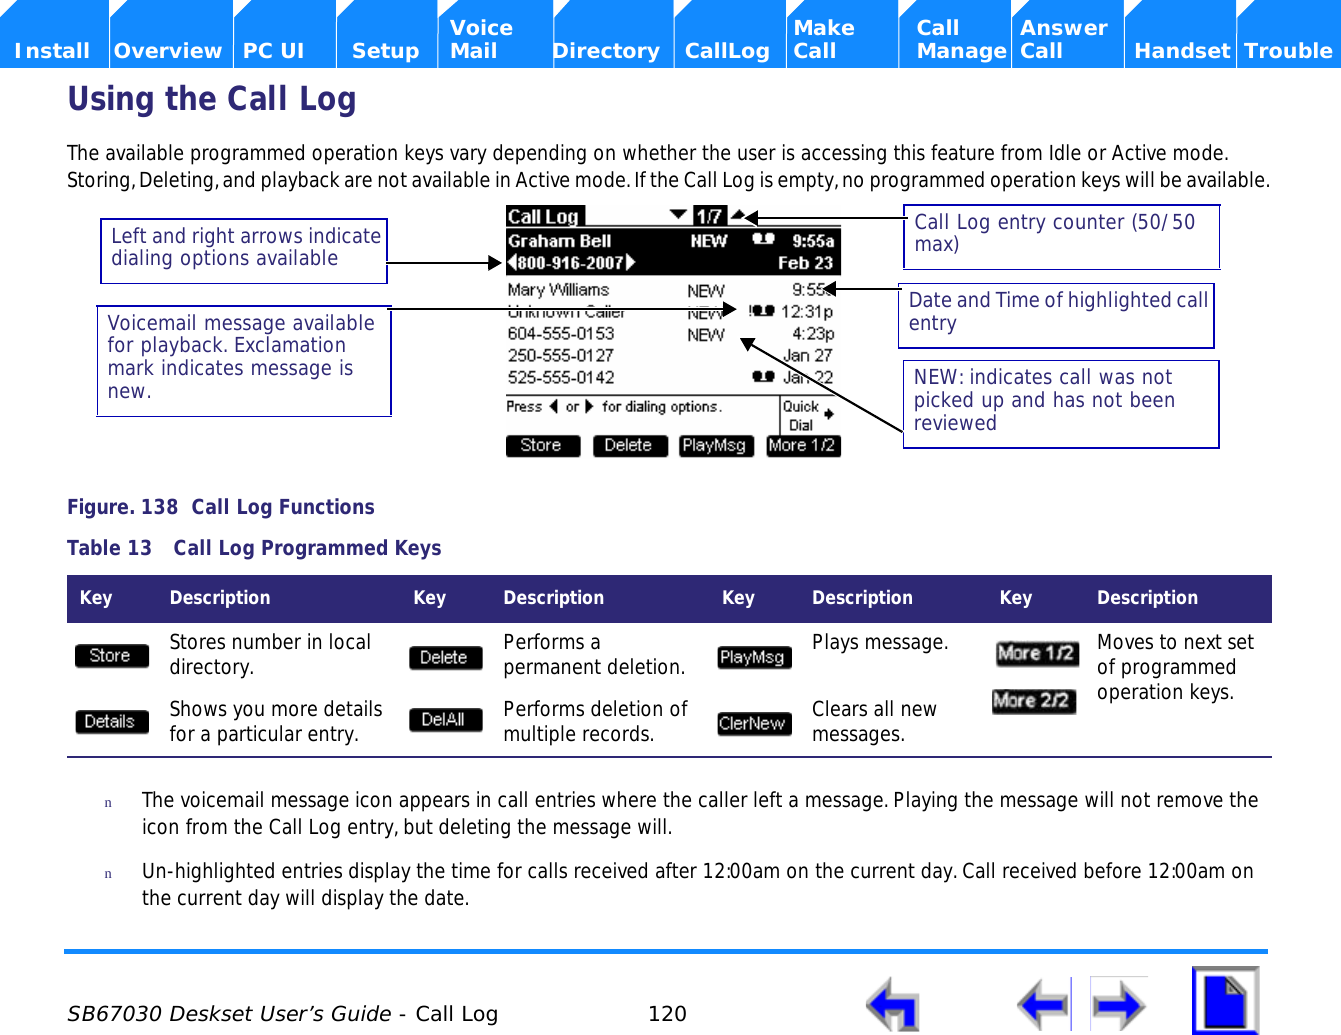  SB67030 Deskset User’s Guide - Call Log 120    Voice Make Call Answer  Install Overview PC UI Setup Mail Directory CallLog Call Manage Call Handset TroubleUsing the Call LogThe available programmed operation keys vary depending on whether the user is accessing this feature from Idle or Active mode. Storing, Deleting, and playback are not available in Active mode. If the Call Log is empty, no programmed operation keys will be available.Figure. 138  Call Log FunctionsnThe voicemail message icon appears in call entries where the caller left a message. Playing the message will not remove the icon from the Call Log entry, but deleting the message will.nUn-highlighted entries display the time for calls received after 12:00am on the current day. Call received before 12:00am on the current day will display the date. Table 13  Call Log Programmed KeysKey  Description Key  Description Key  Description Key  DescriptionStores number in local directory. Performs a permanent deletion. Plays message.  Moves to next set of programmed operation keys. Shows you more details for a particular entry. Performs deletion of multiple records. Clears all new messages.Call Log entry counter (50/50 max)NEW: indicates call was not picked up and has not been reviewedDate and Time of highlighted call entryLeft and right arrows indicate dialing options availableVoicemail message available for playback. Exclamation mark indicates message is new.